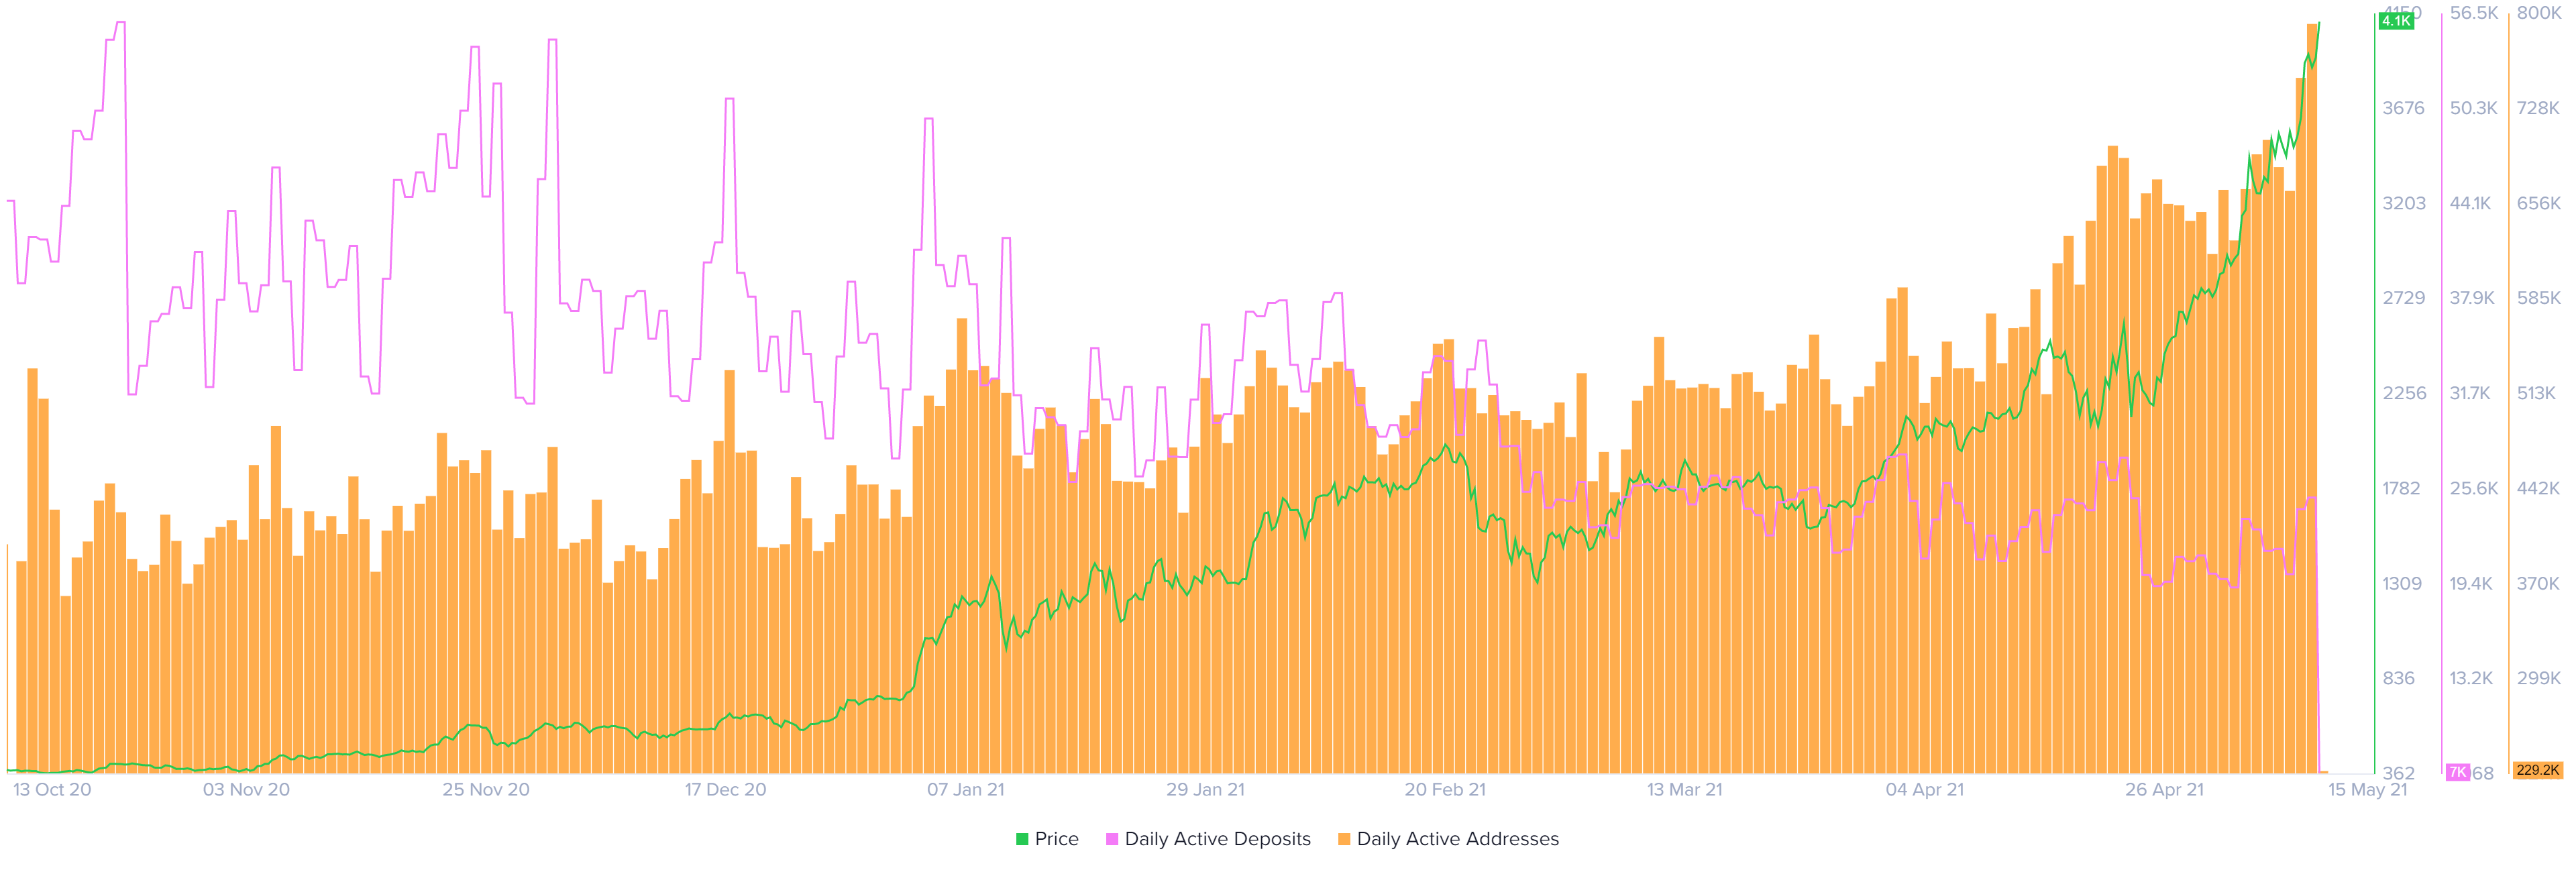 ETH daily active addresses and daily active deposits chart